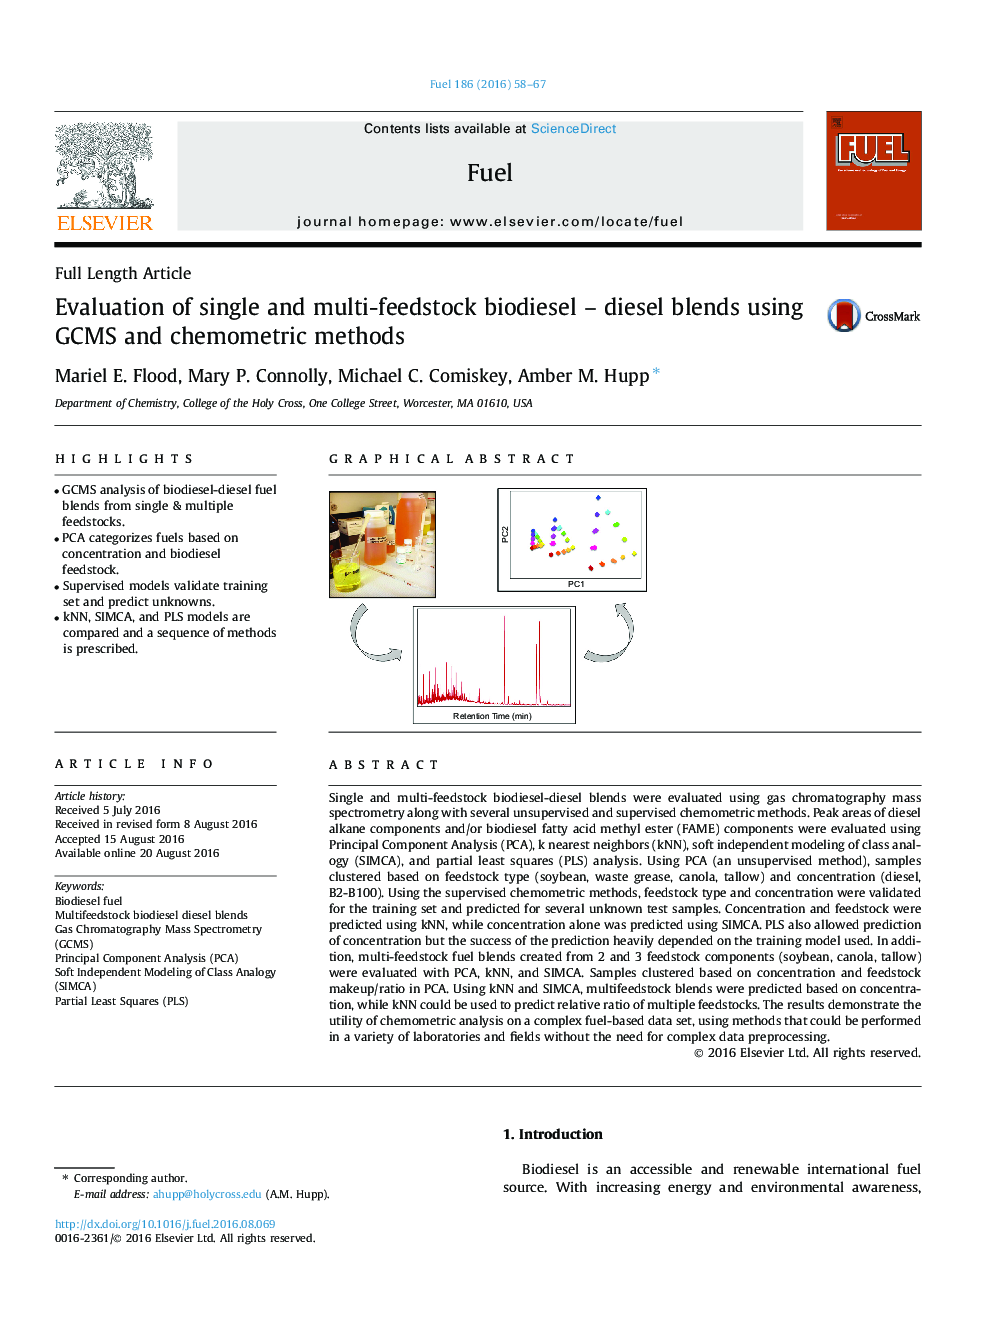 Evaluation of single and multi-feedstock biodiesel – diesel blends using GCMS and chemometric methods